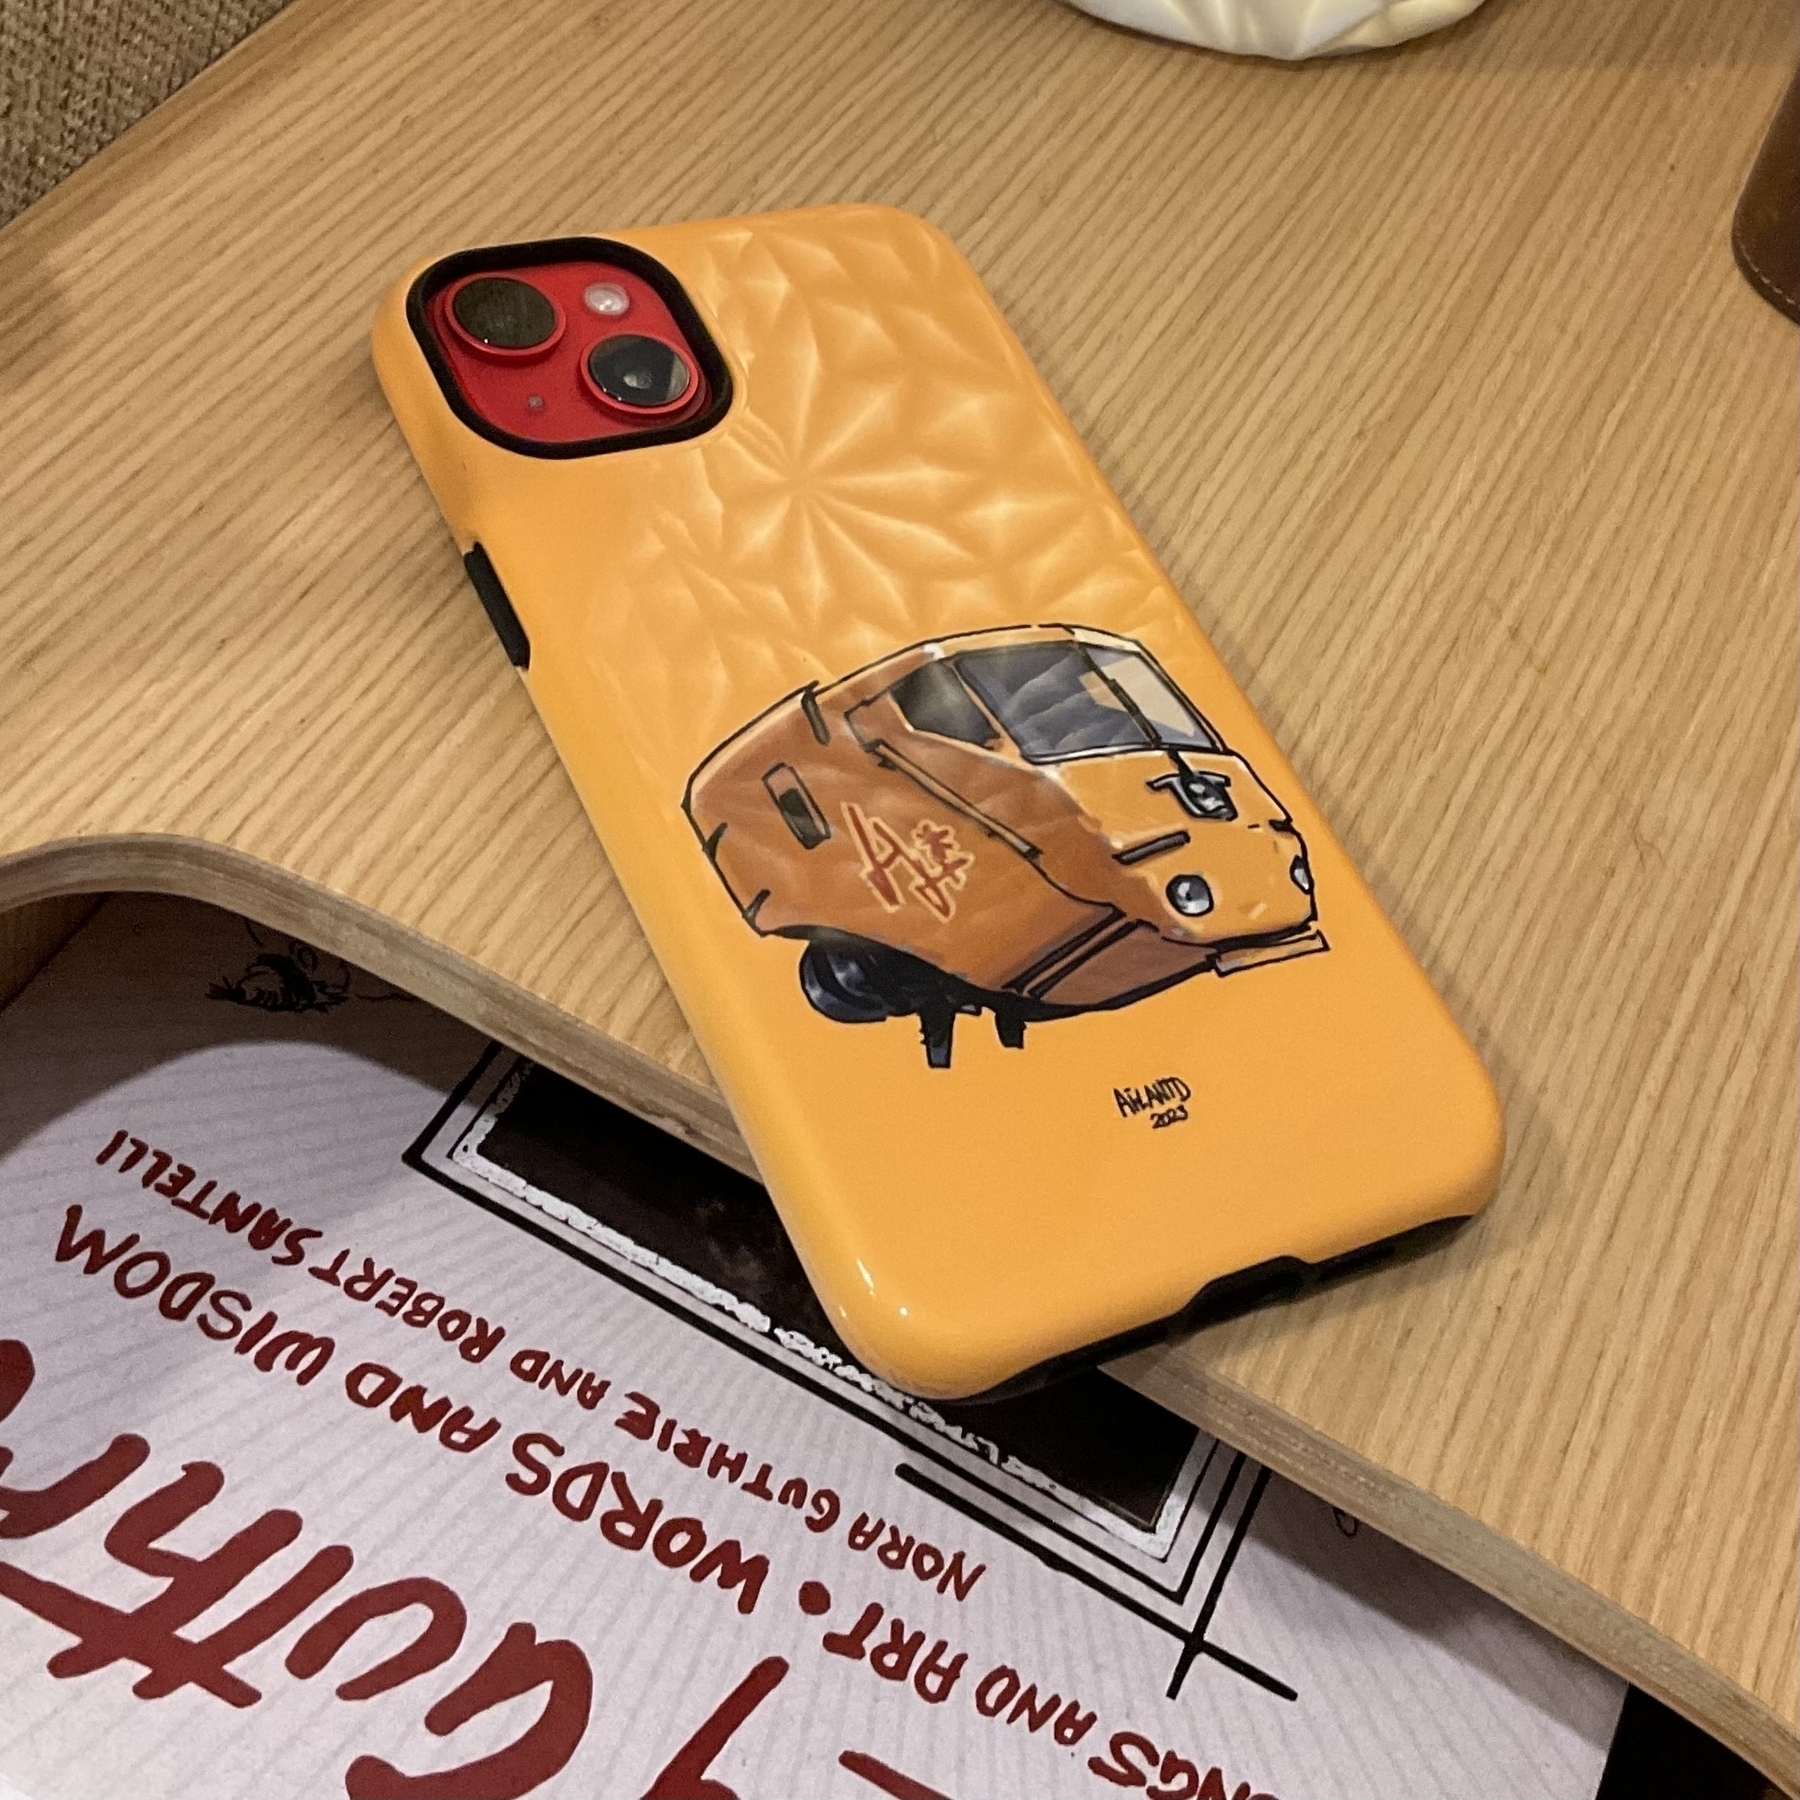 A yellow phone case with a bright yellow flying square minivan-like vehicle, which is typical of Ailantd's style of illustration. 